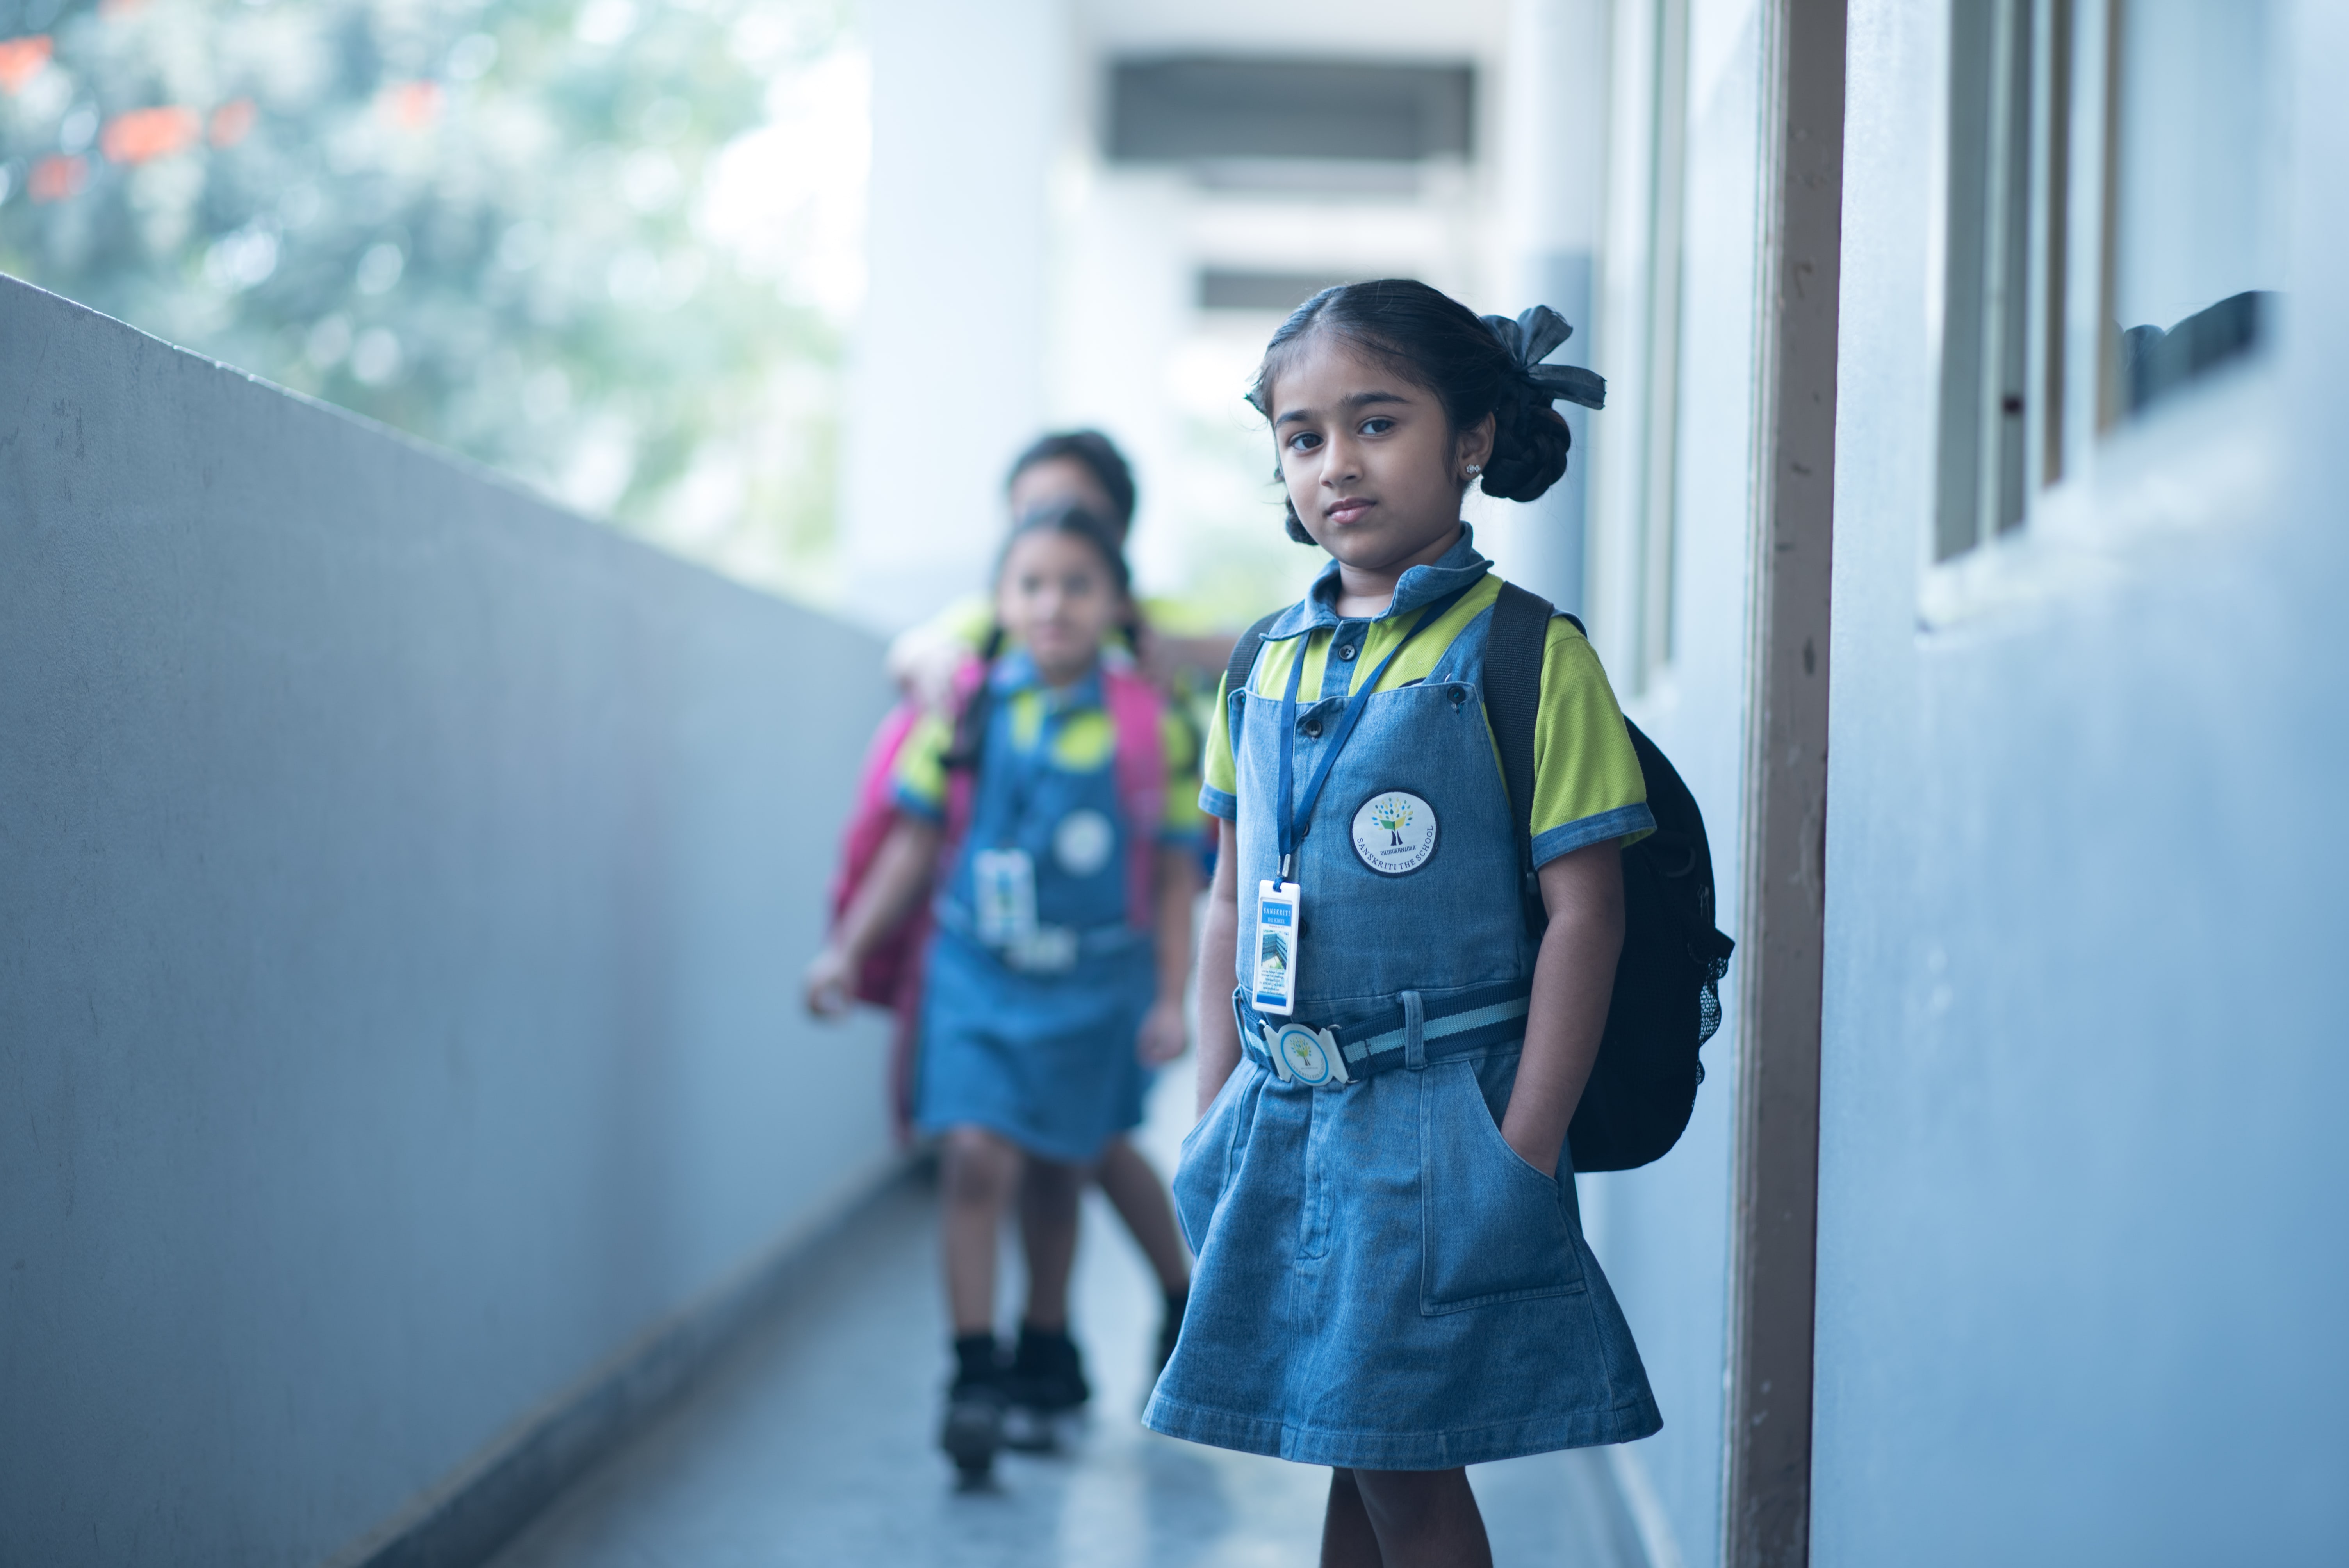 School Uniforms & School Clothes for Boys and Girls